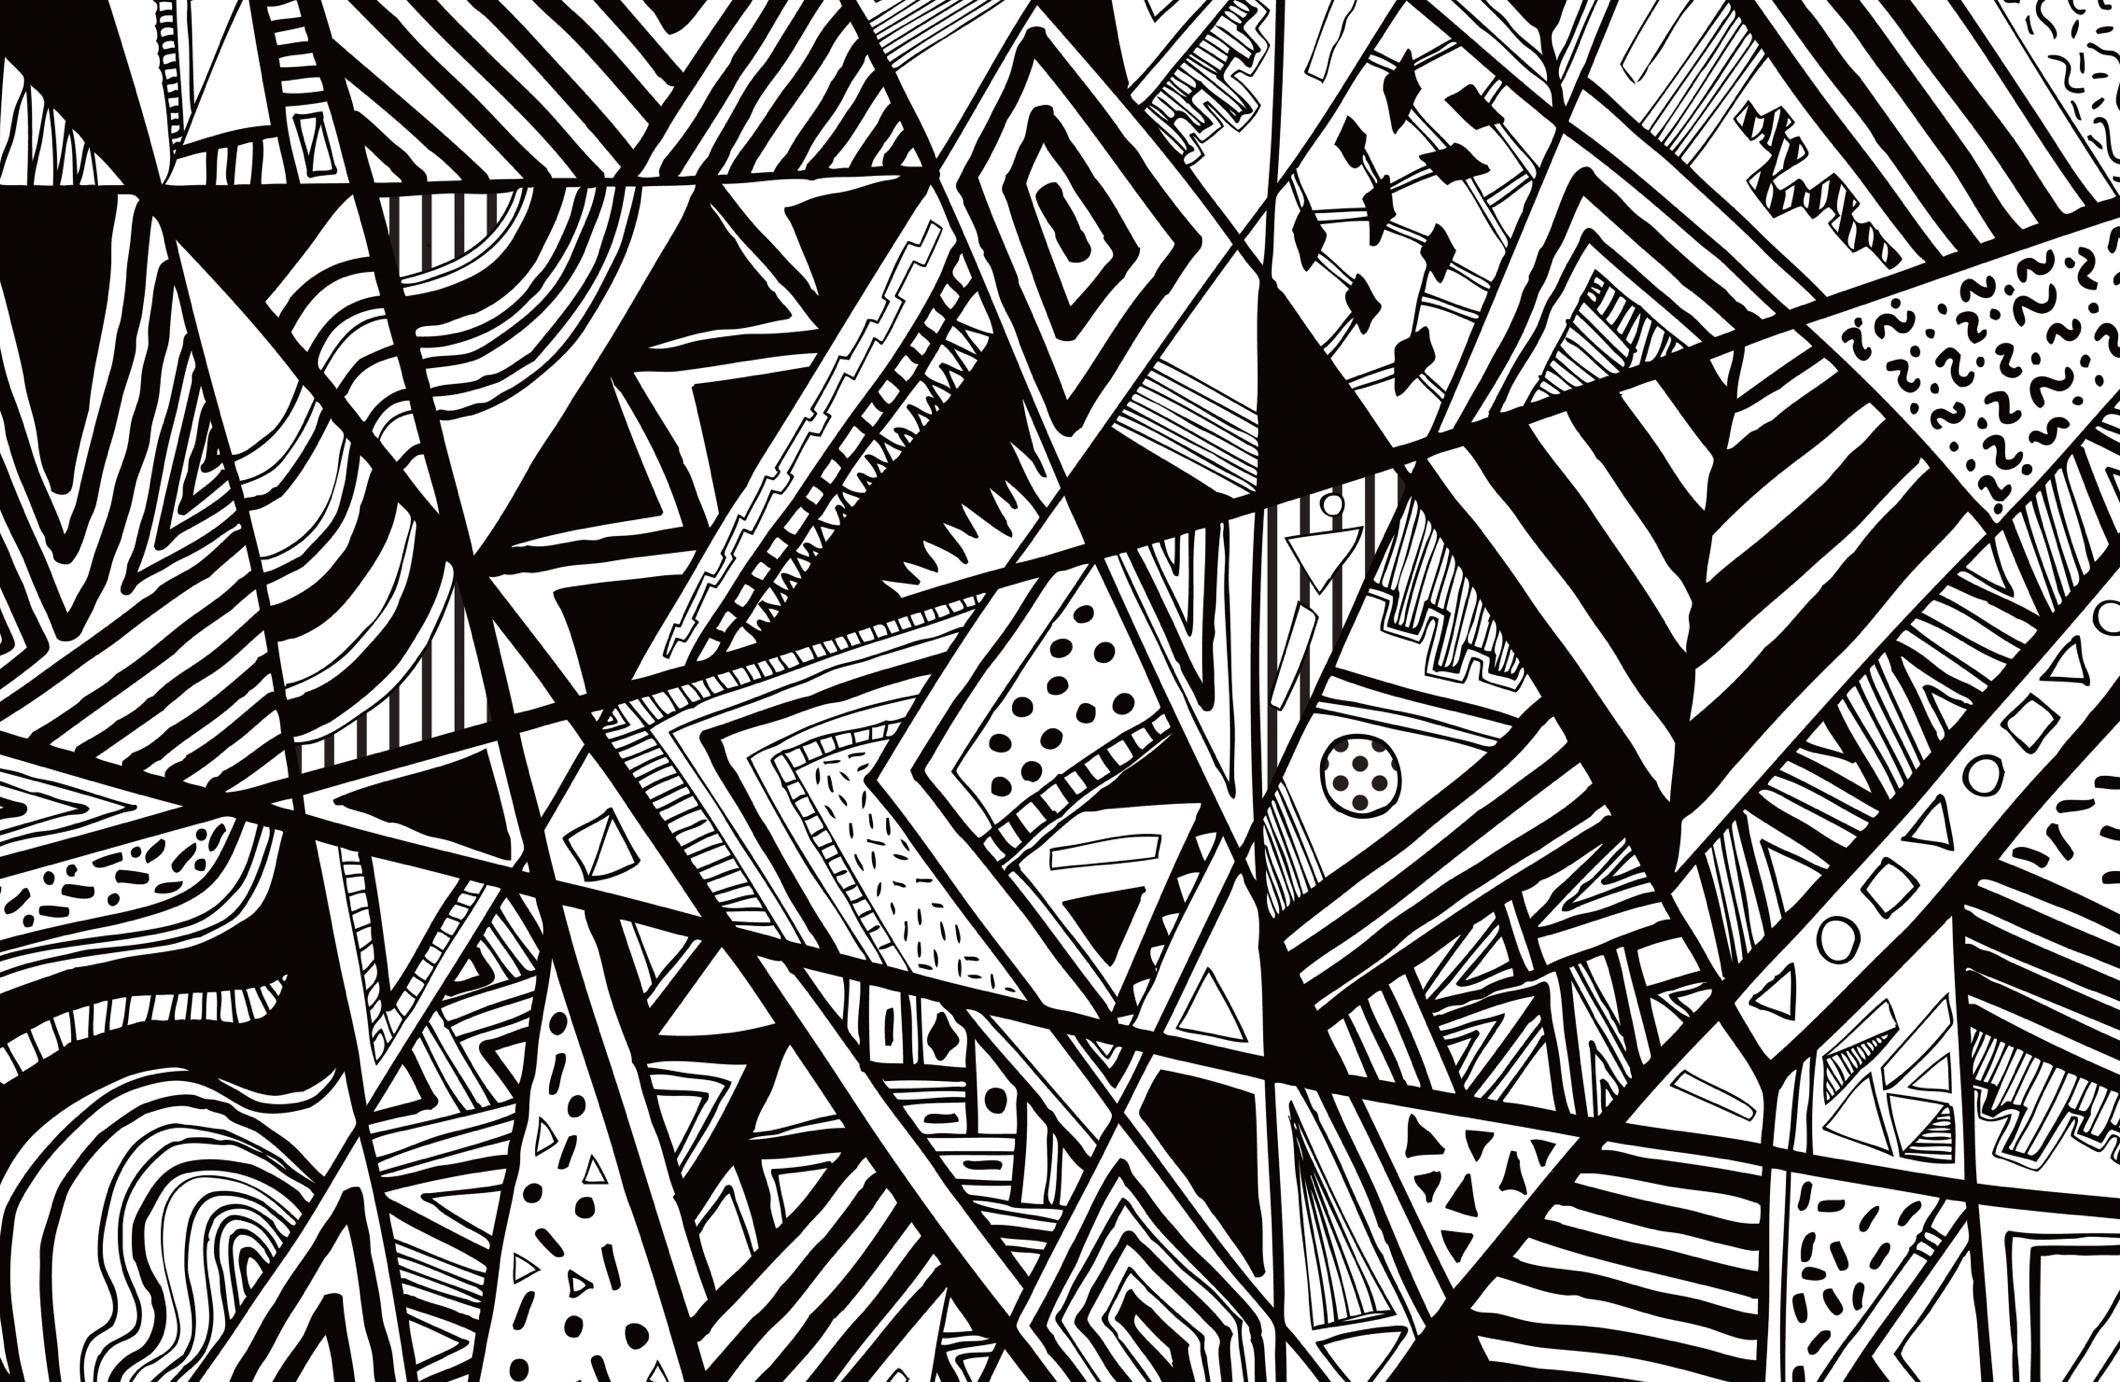 Black and White Abstract Wallpaper 5 HD Wallpaper Free